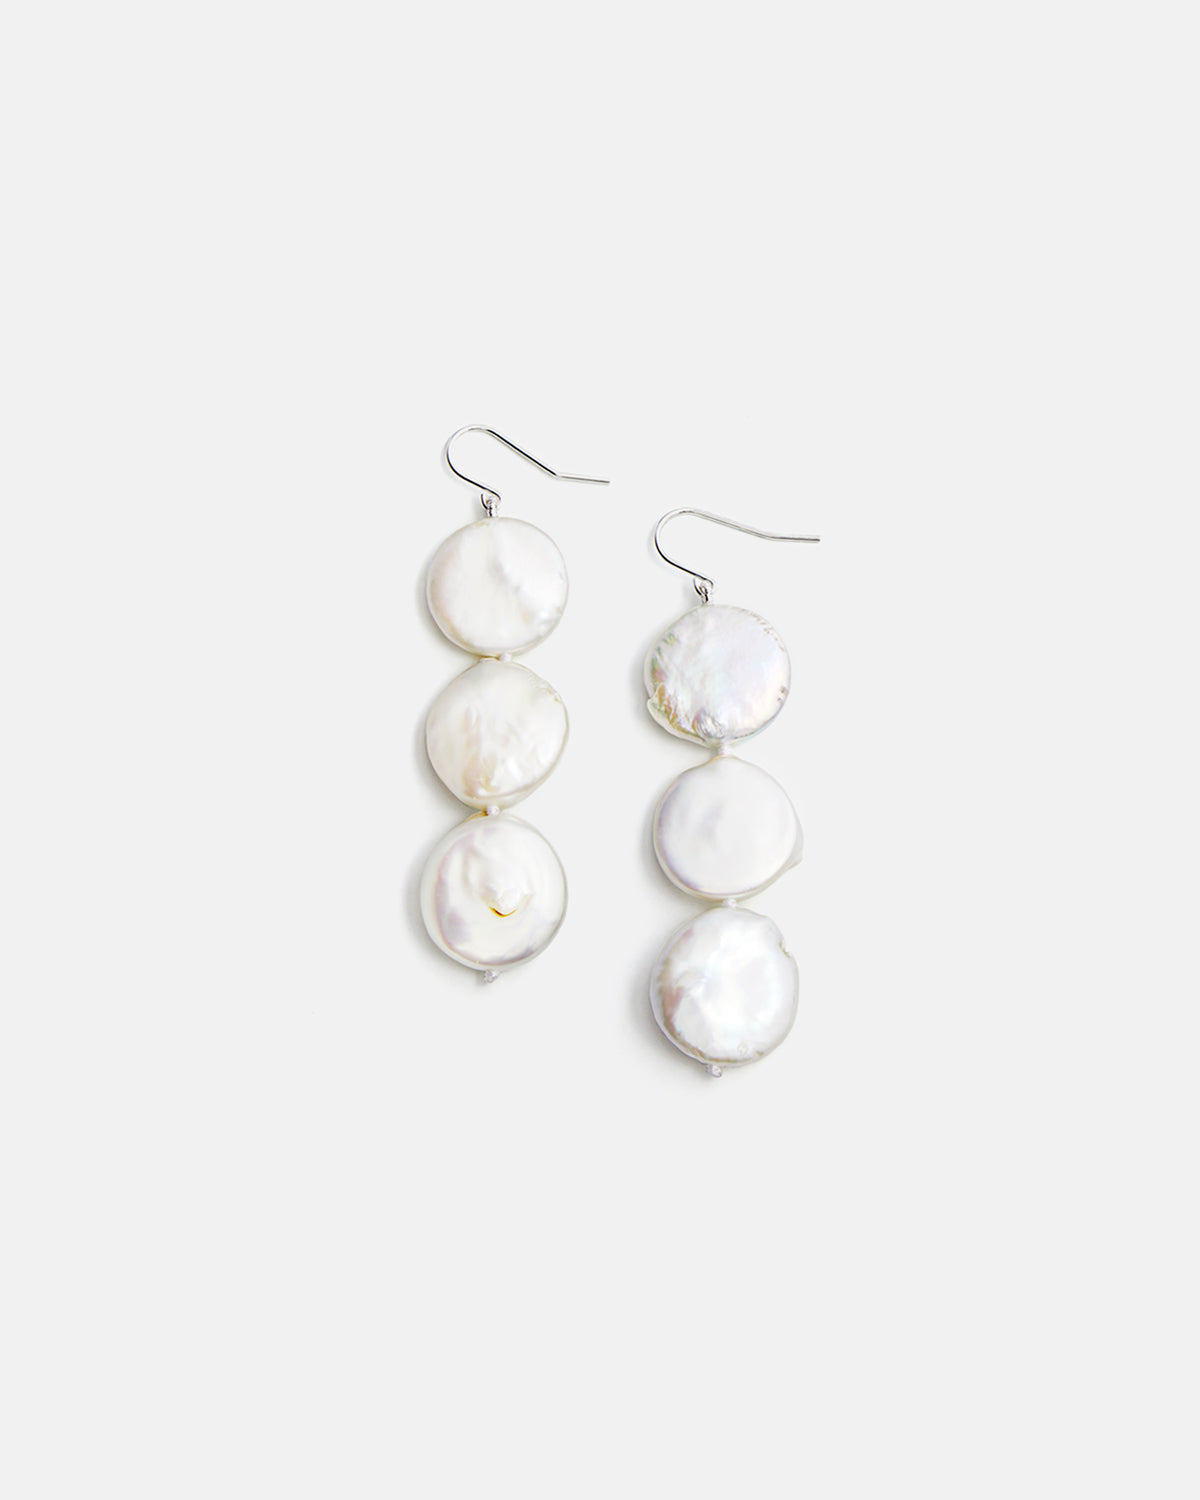 Calypso Earrings in Silver with Pearls